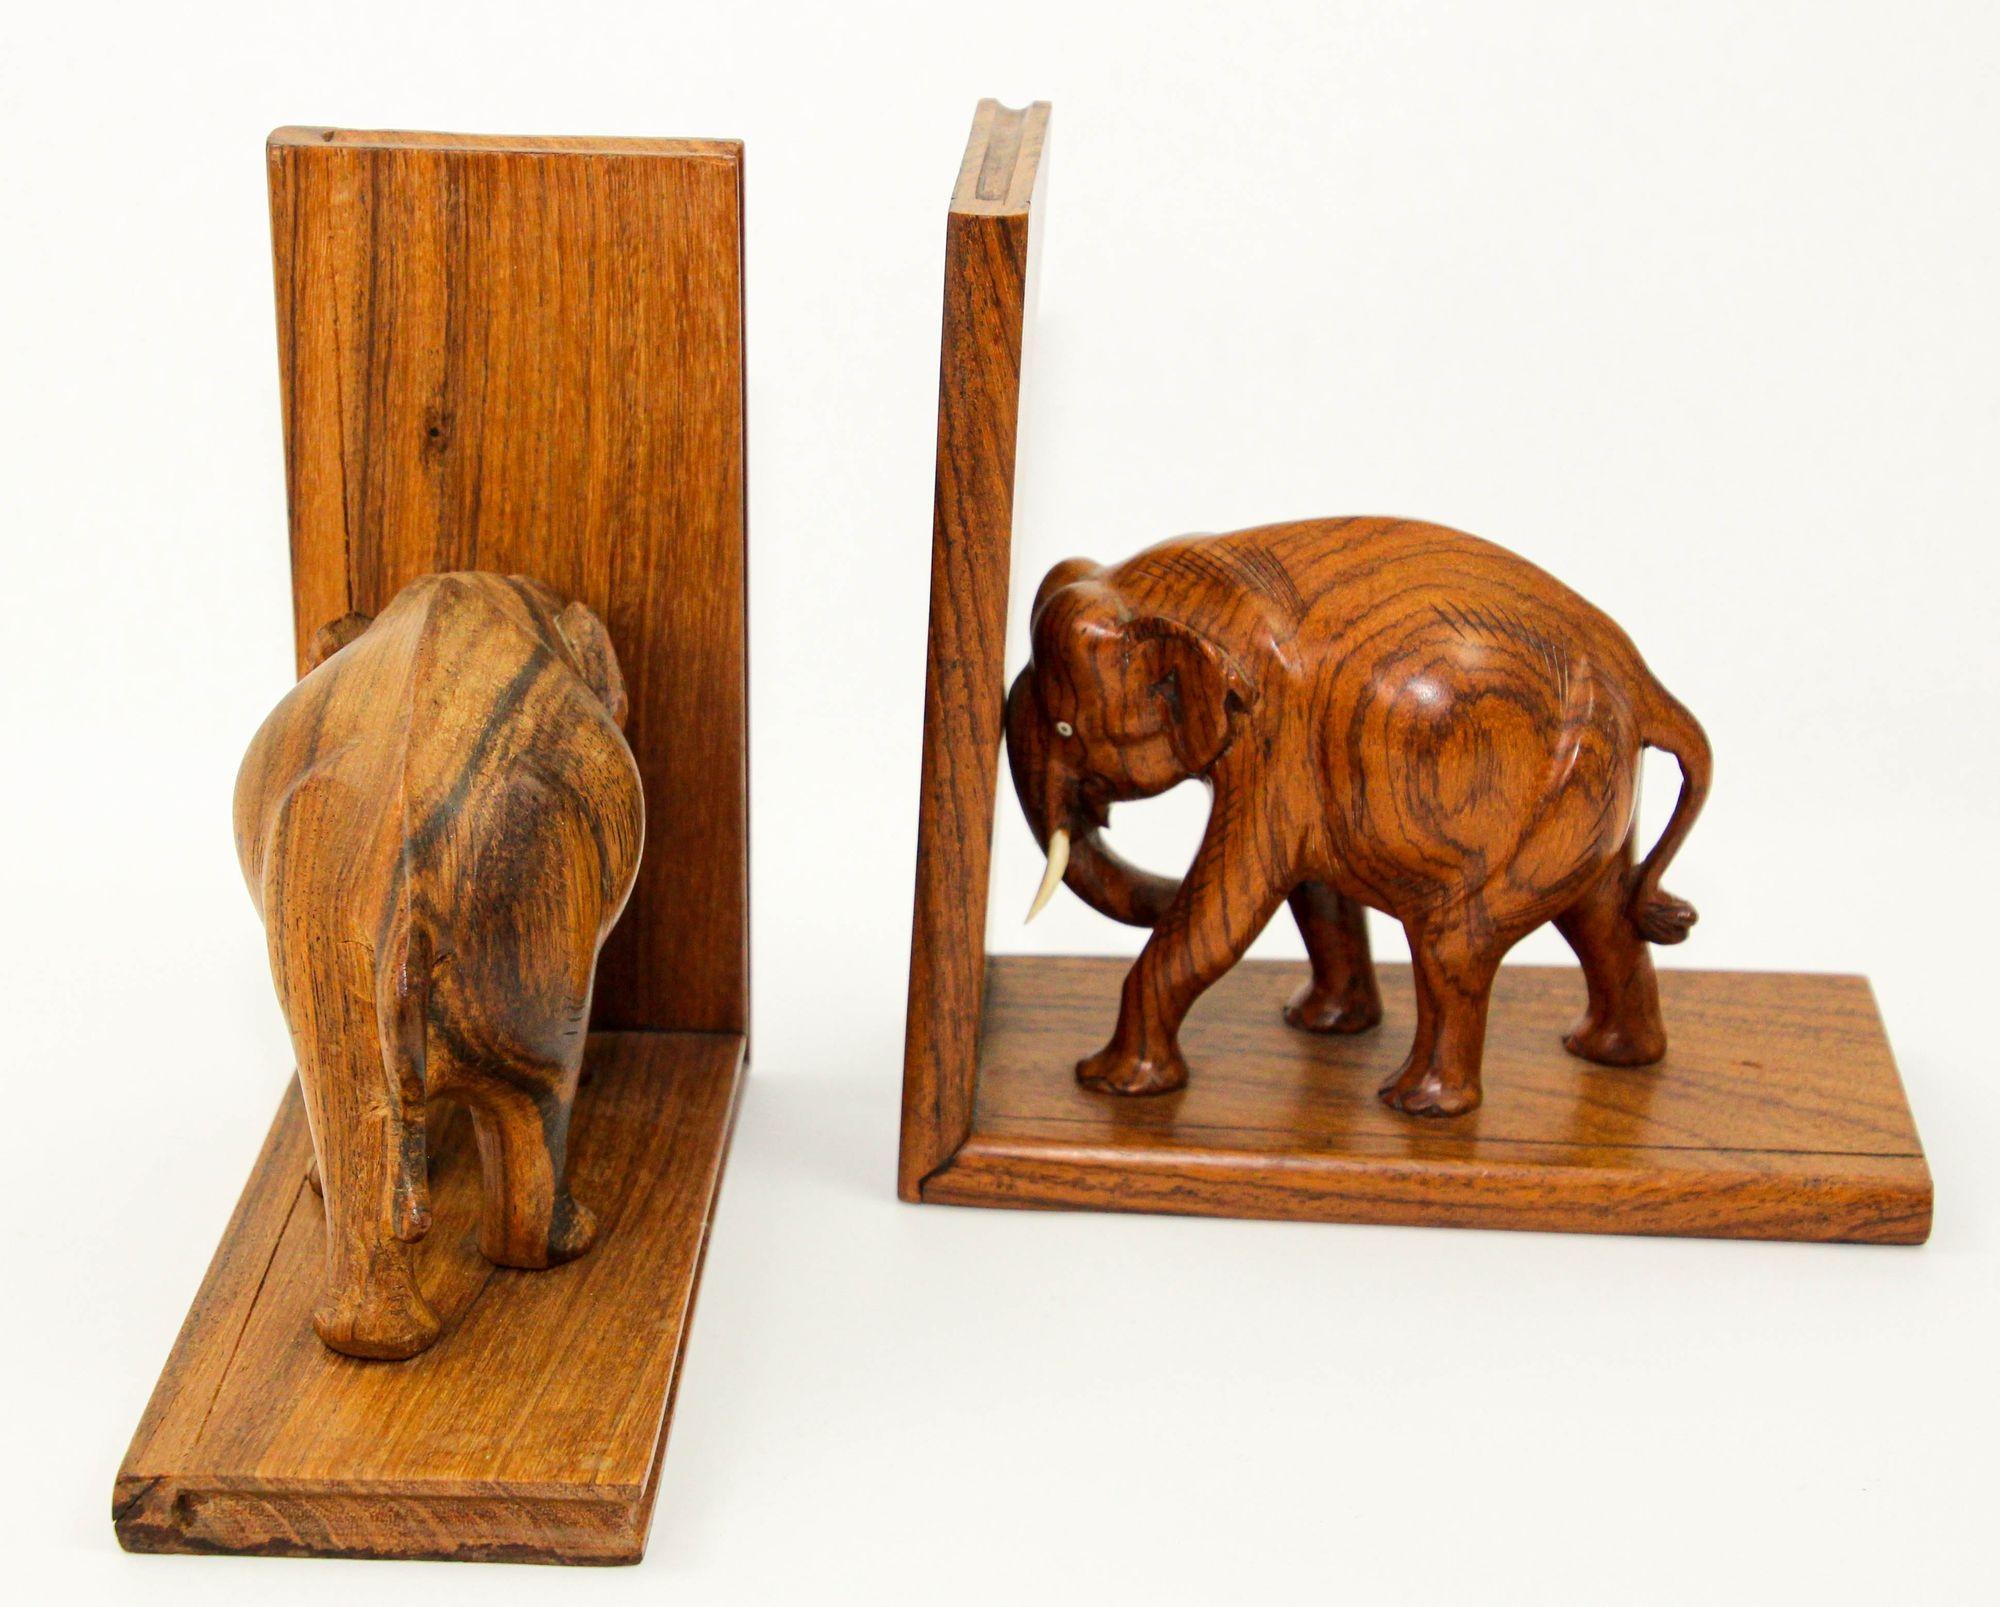 Hand-Carved Art Deco Wooden Asian Elephant Bookends Hand Carved Rosewood India 1940s For Sale